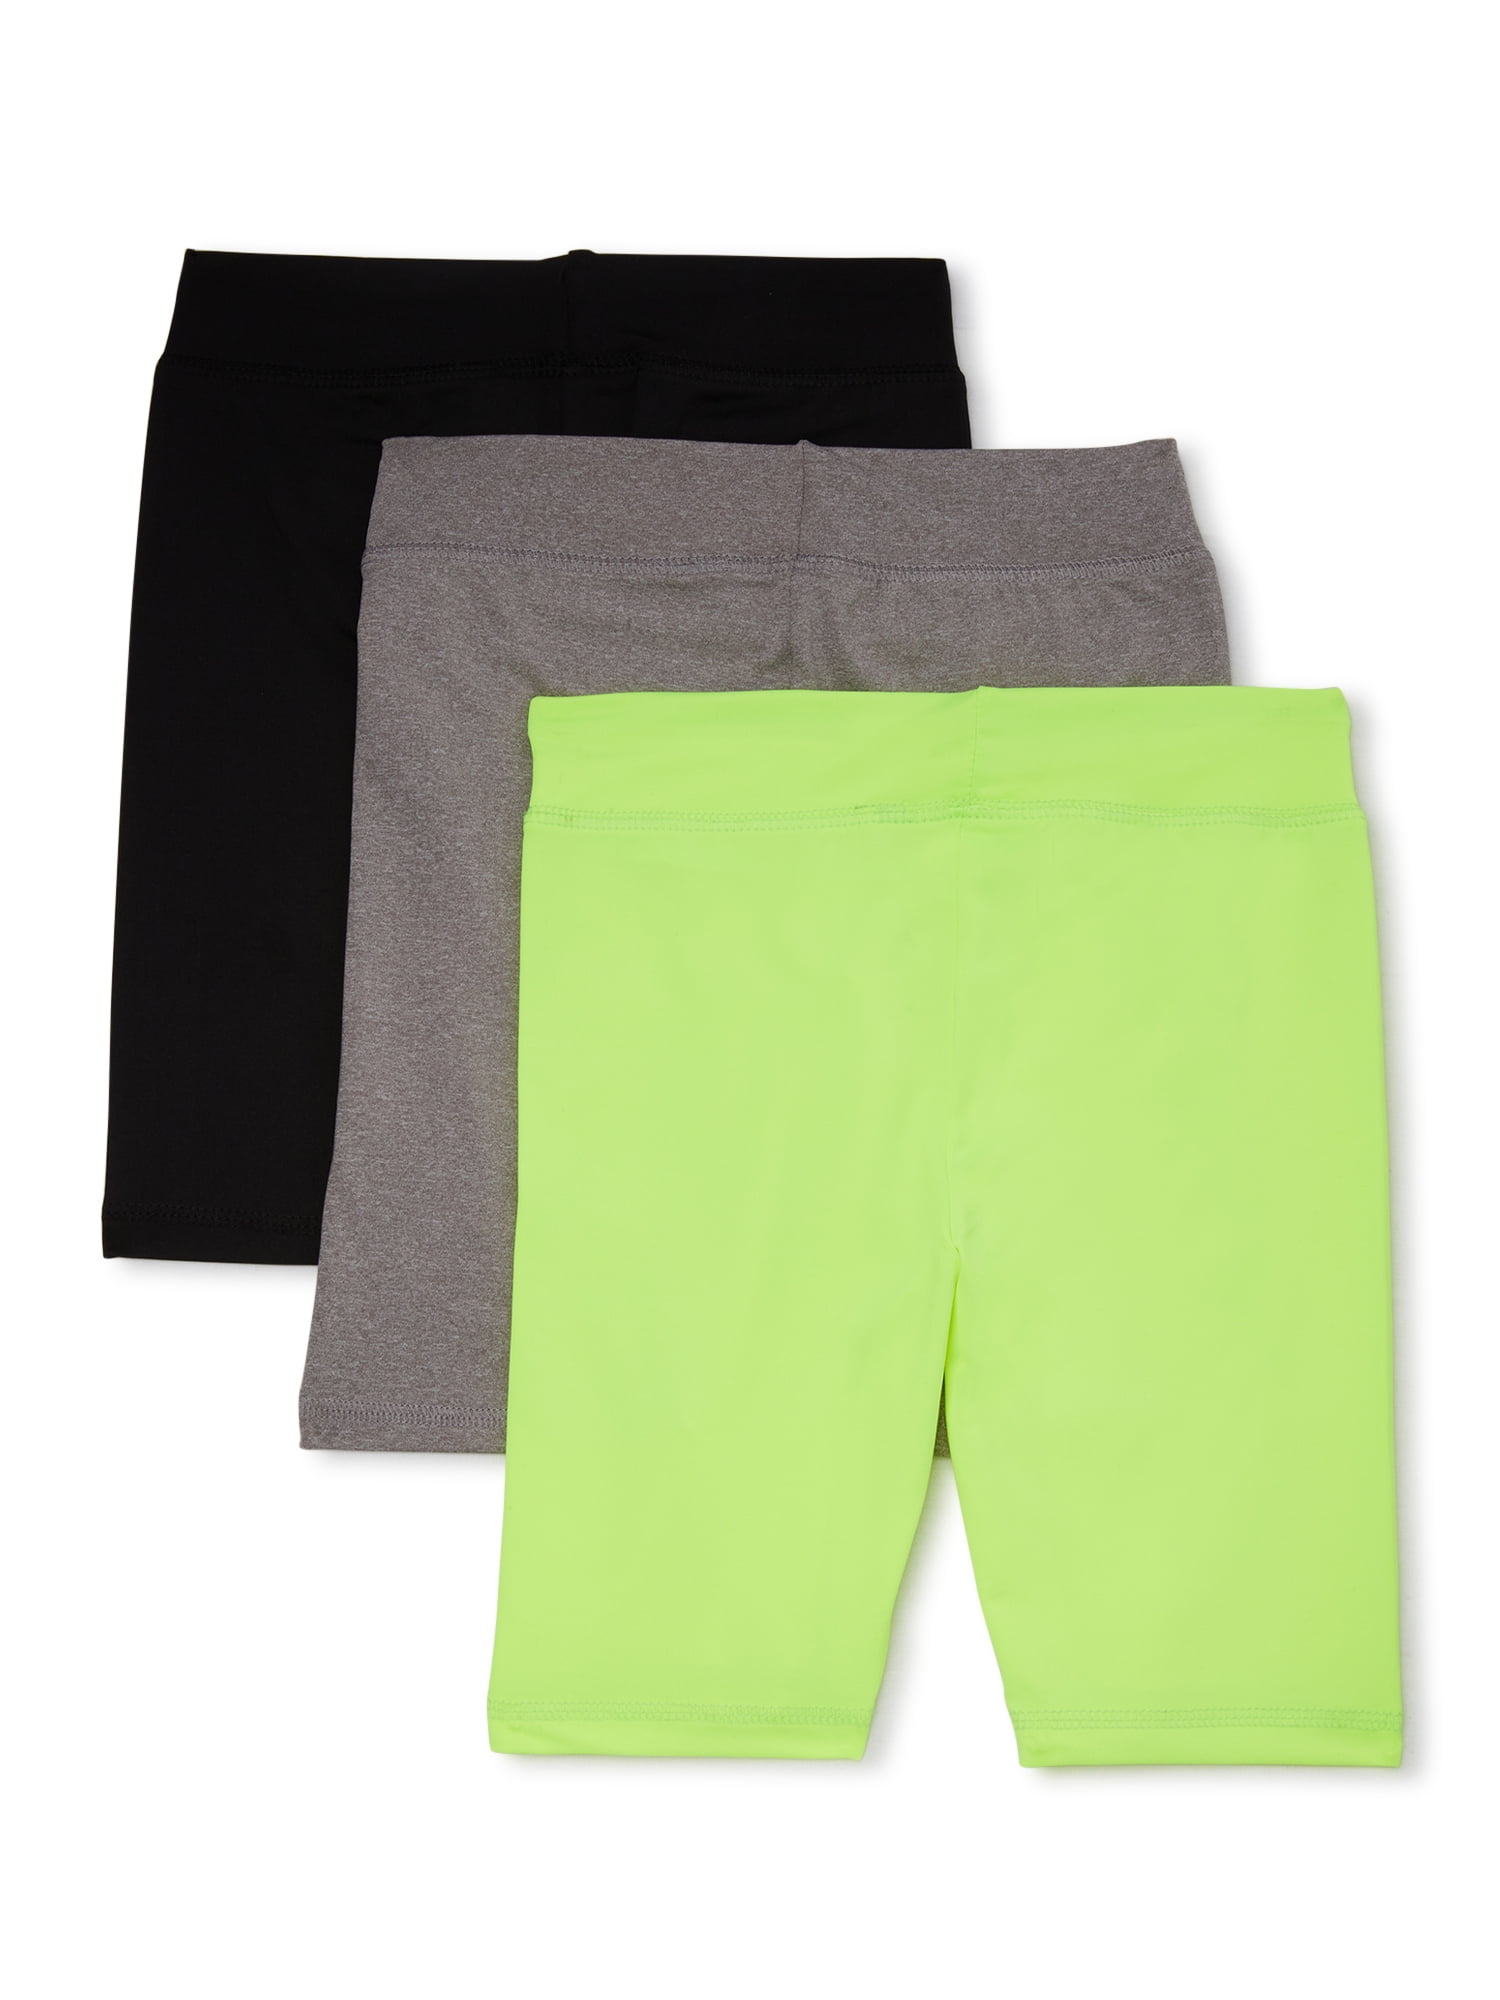 Hind Girls Active Bike Shorts, 3-Pack, Sizes 4-16 